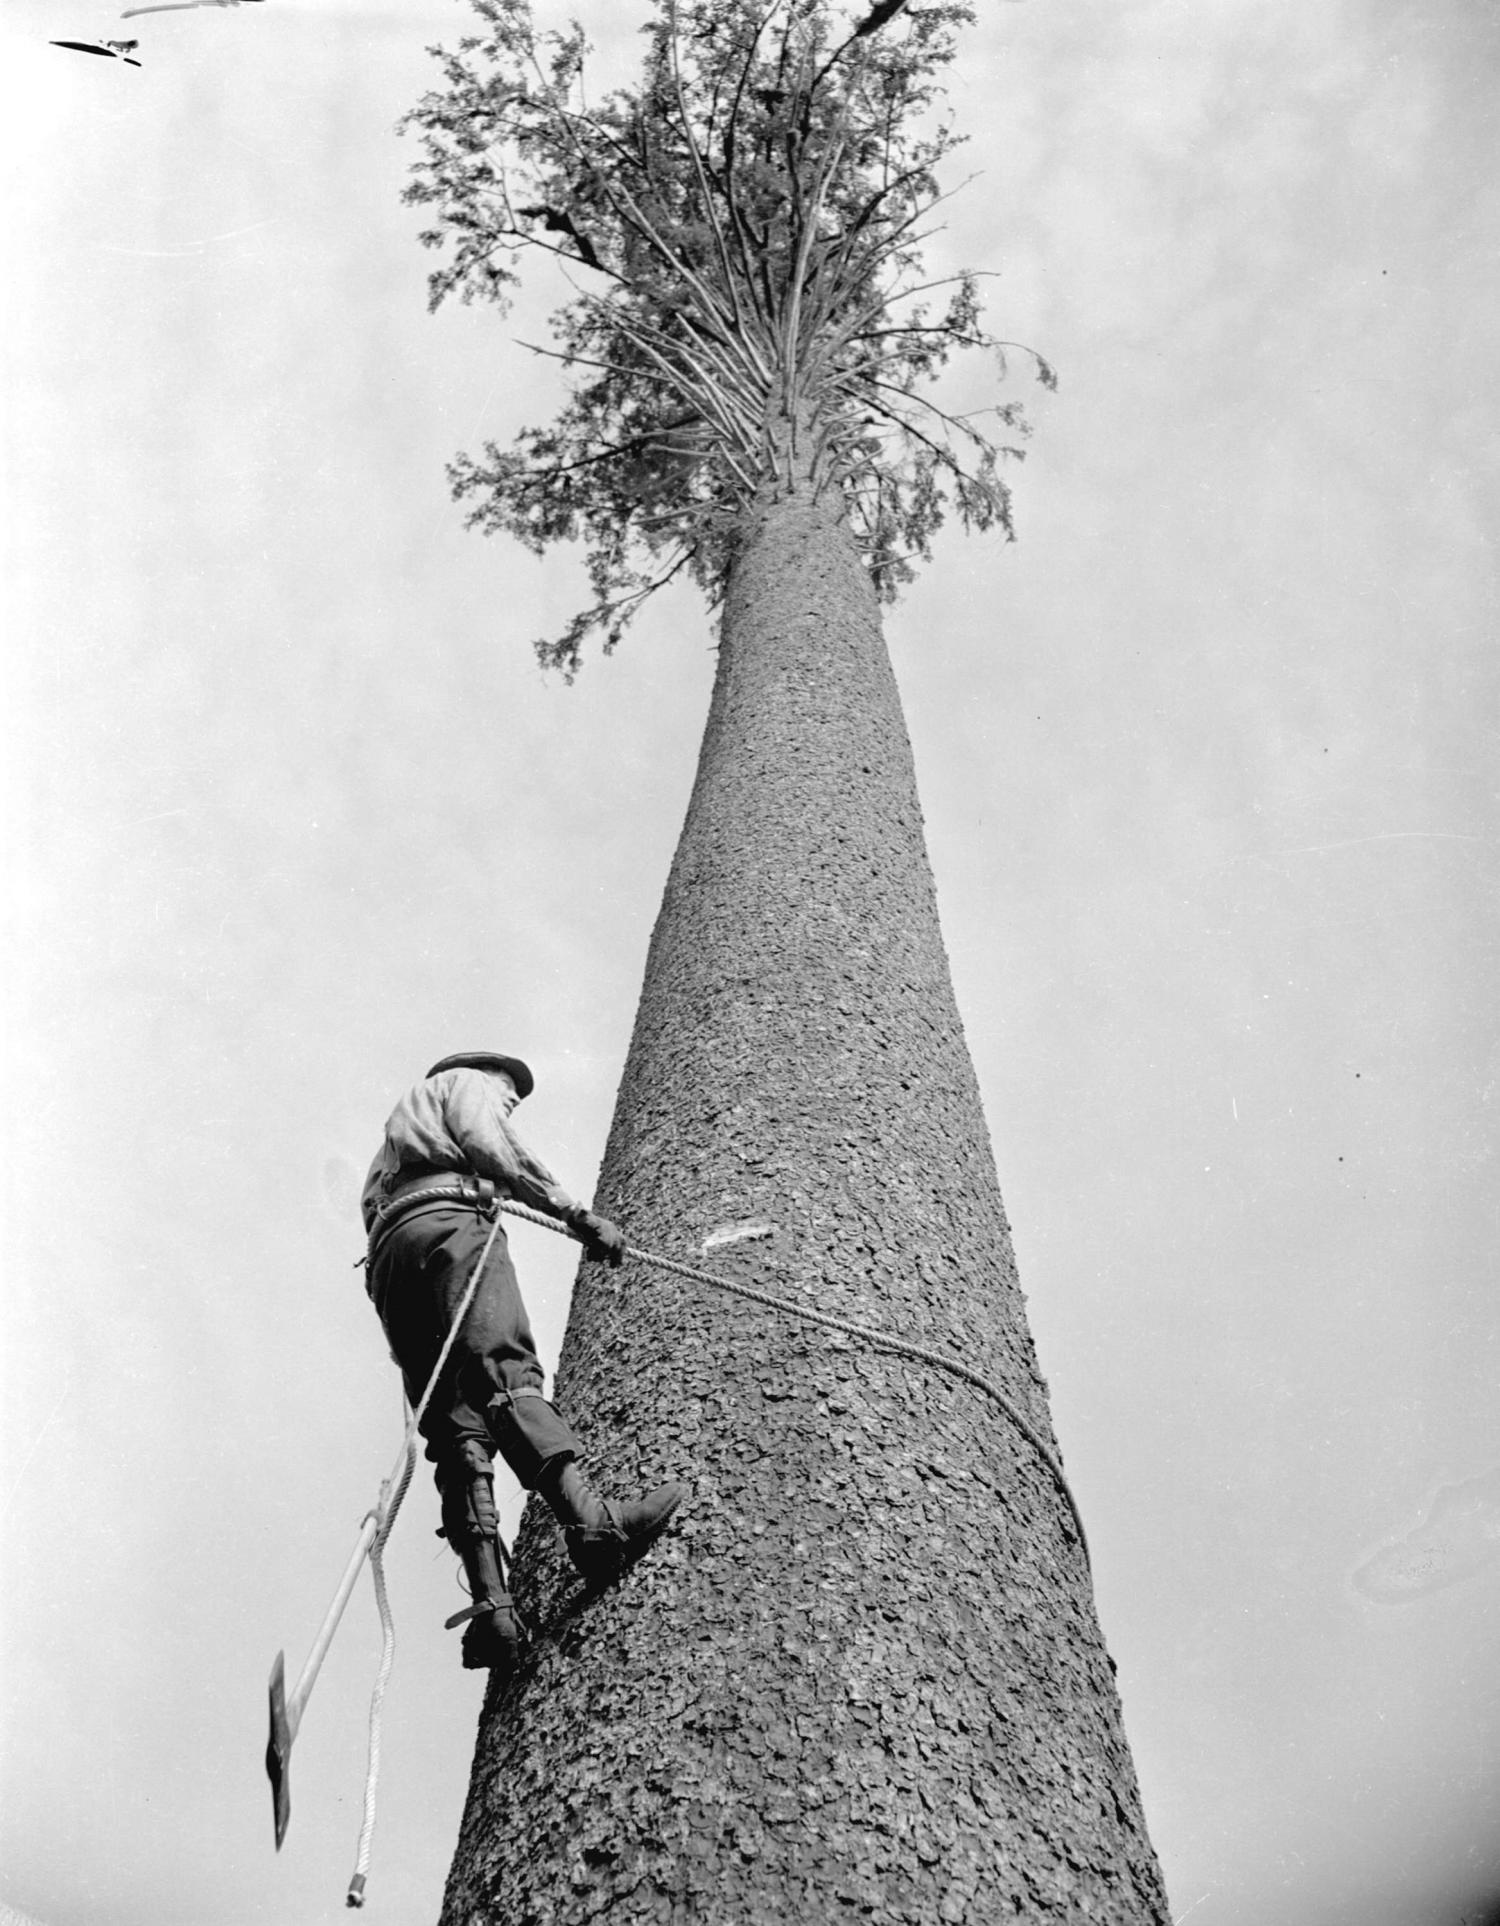 Logger climbing a tree on the Queen Charlotte Islands.